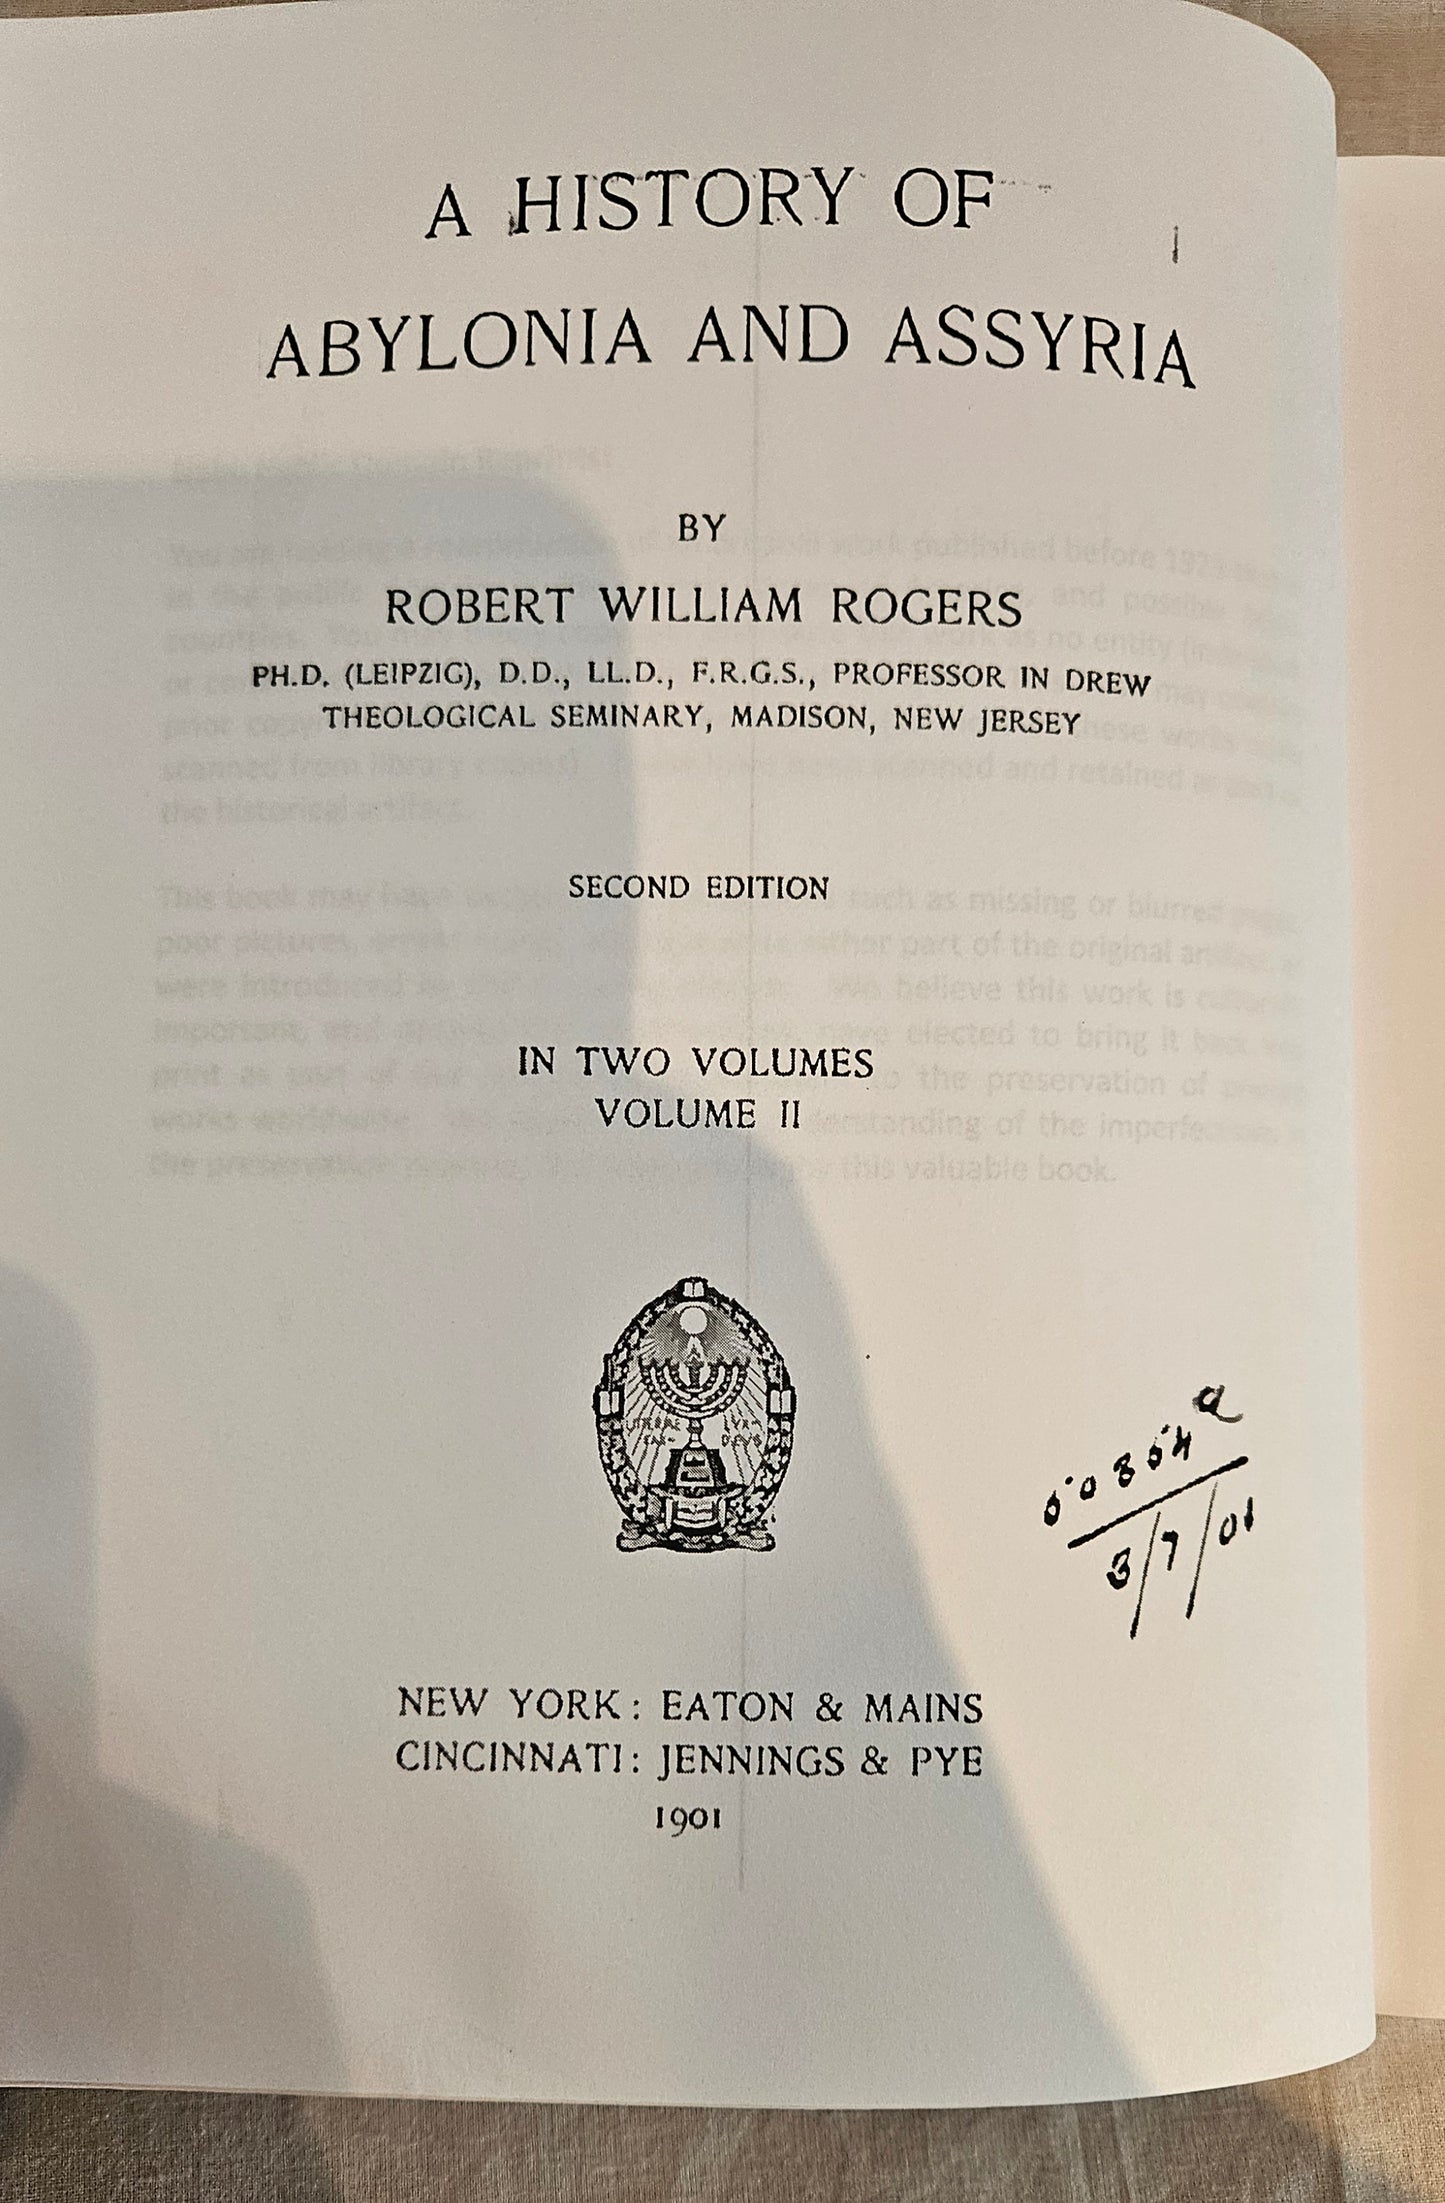 A History of Babylonia and Assyria Volume 2 by Robert William Rogers